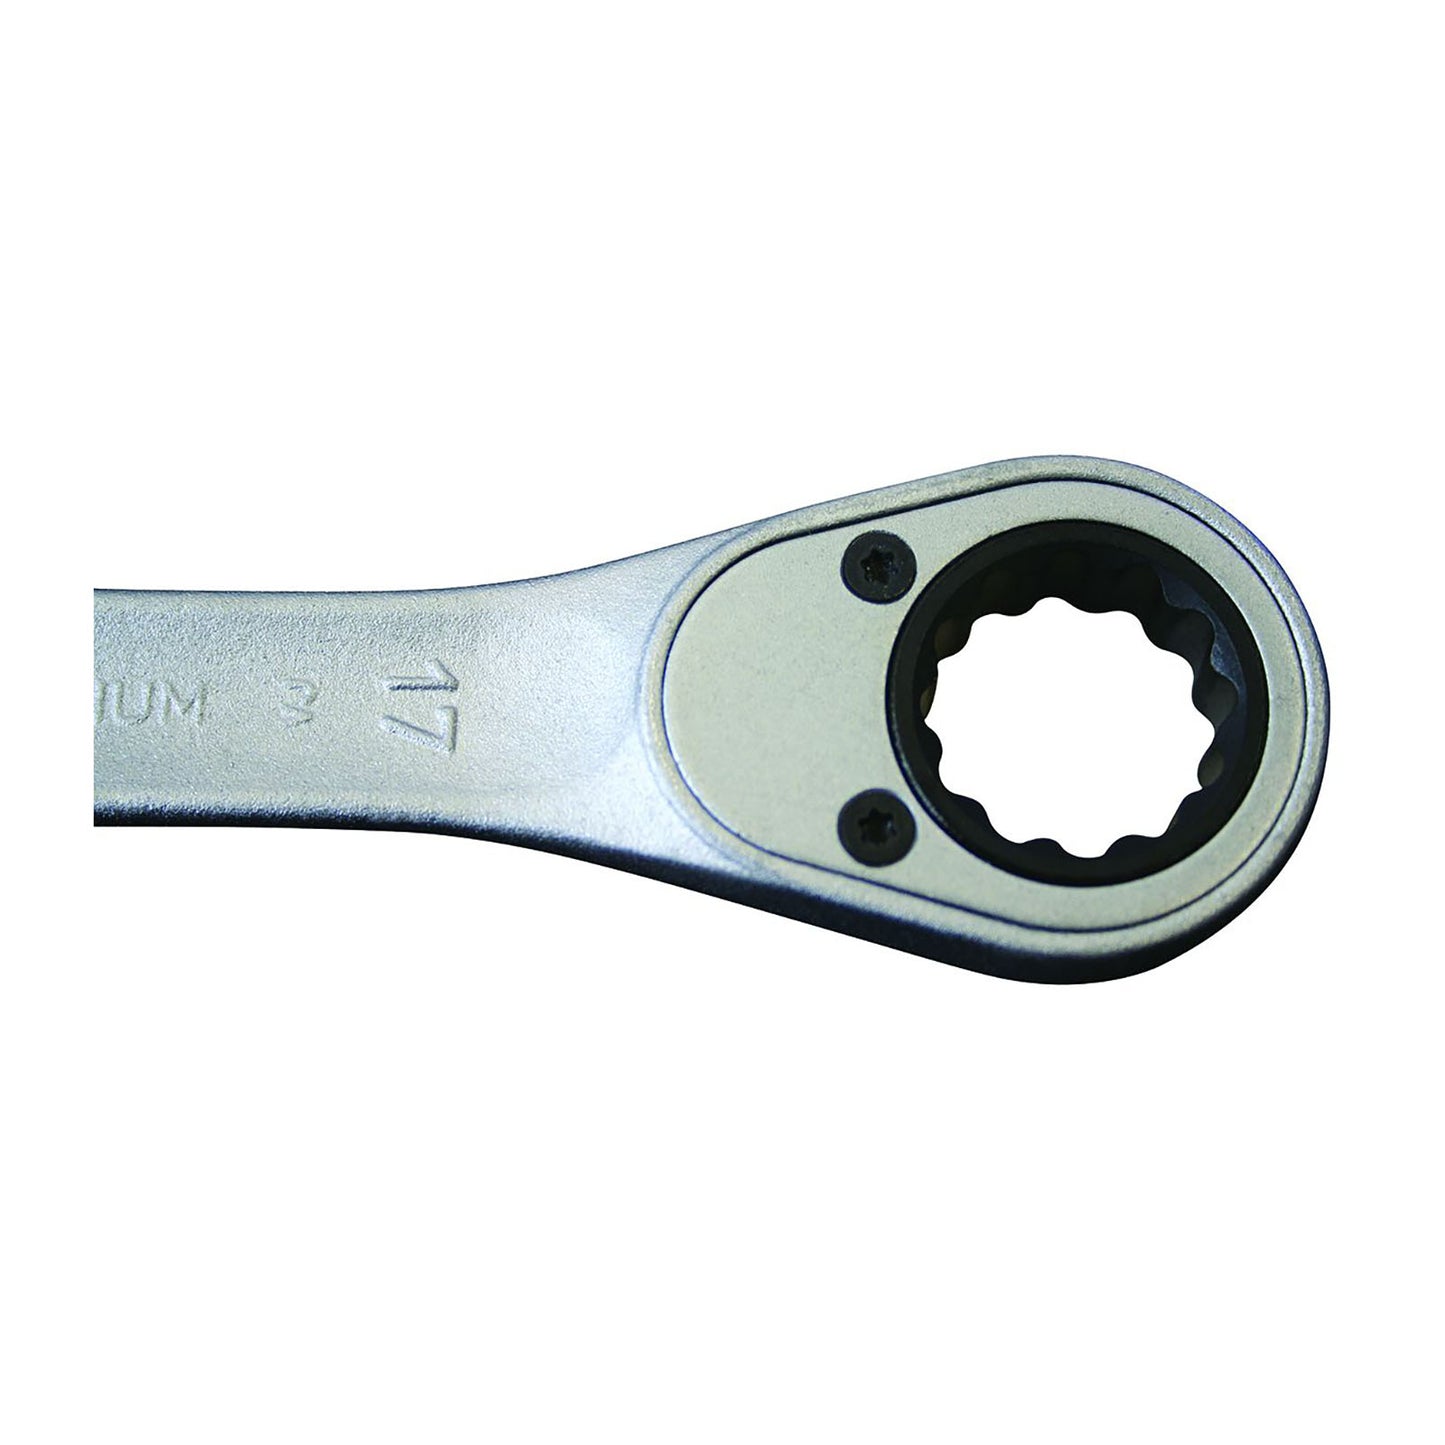 GEDORE 7 R 16 - Ratchet combination wrench, 16mm (2297140)